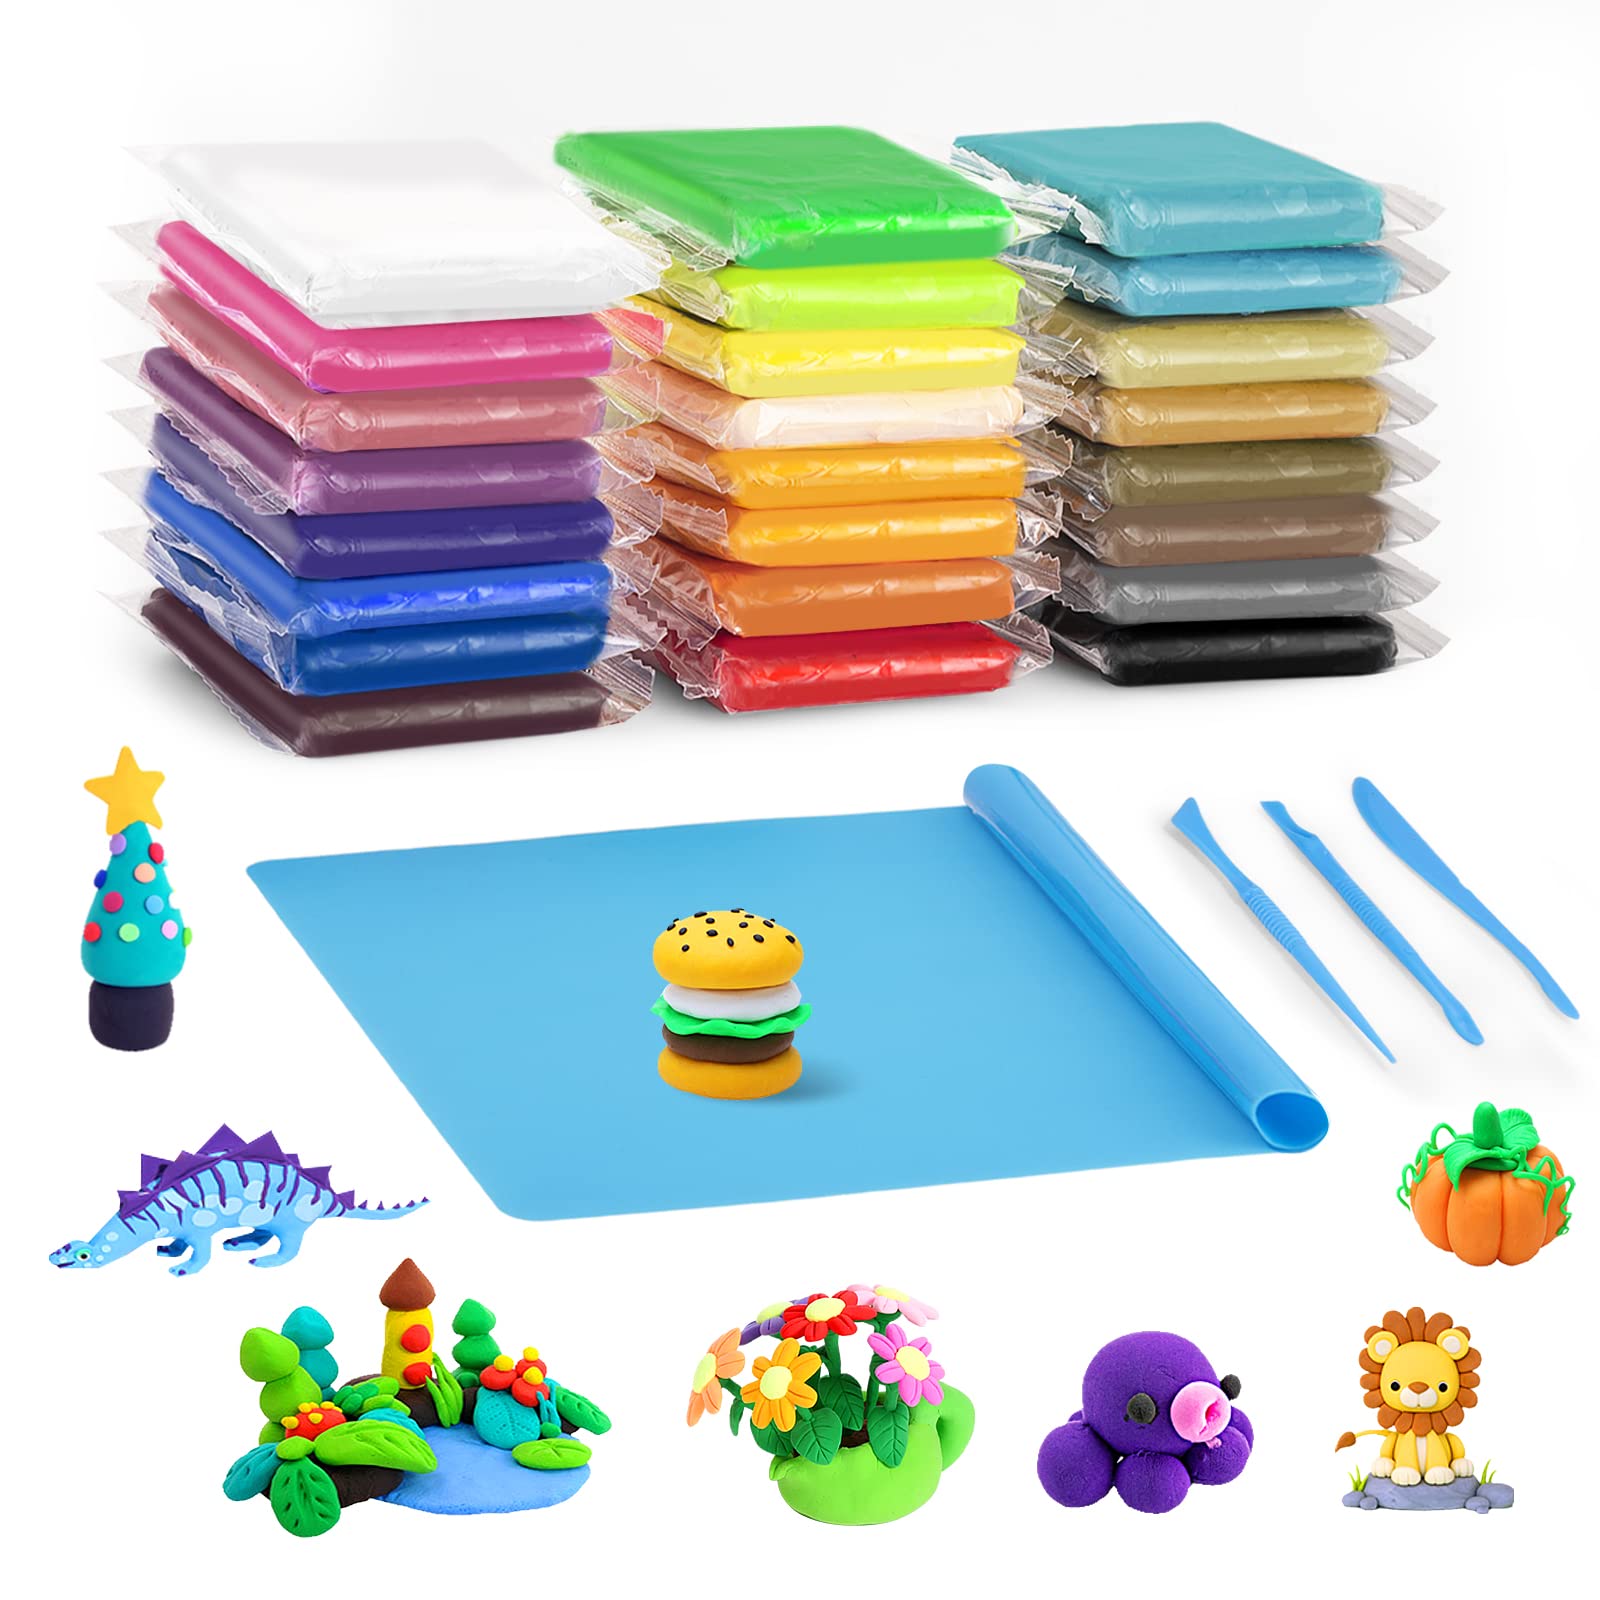 Kilpkonn Air Dry Clay 24 Colors Modeling Clay with Play Mat & 3 Sculpting  Tools Soft & Safe & No Baking Ideal Arts and Crafts Gift for Kids 24 Clays